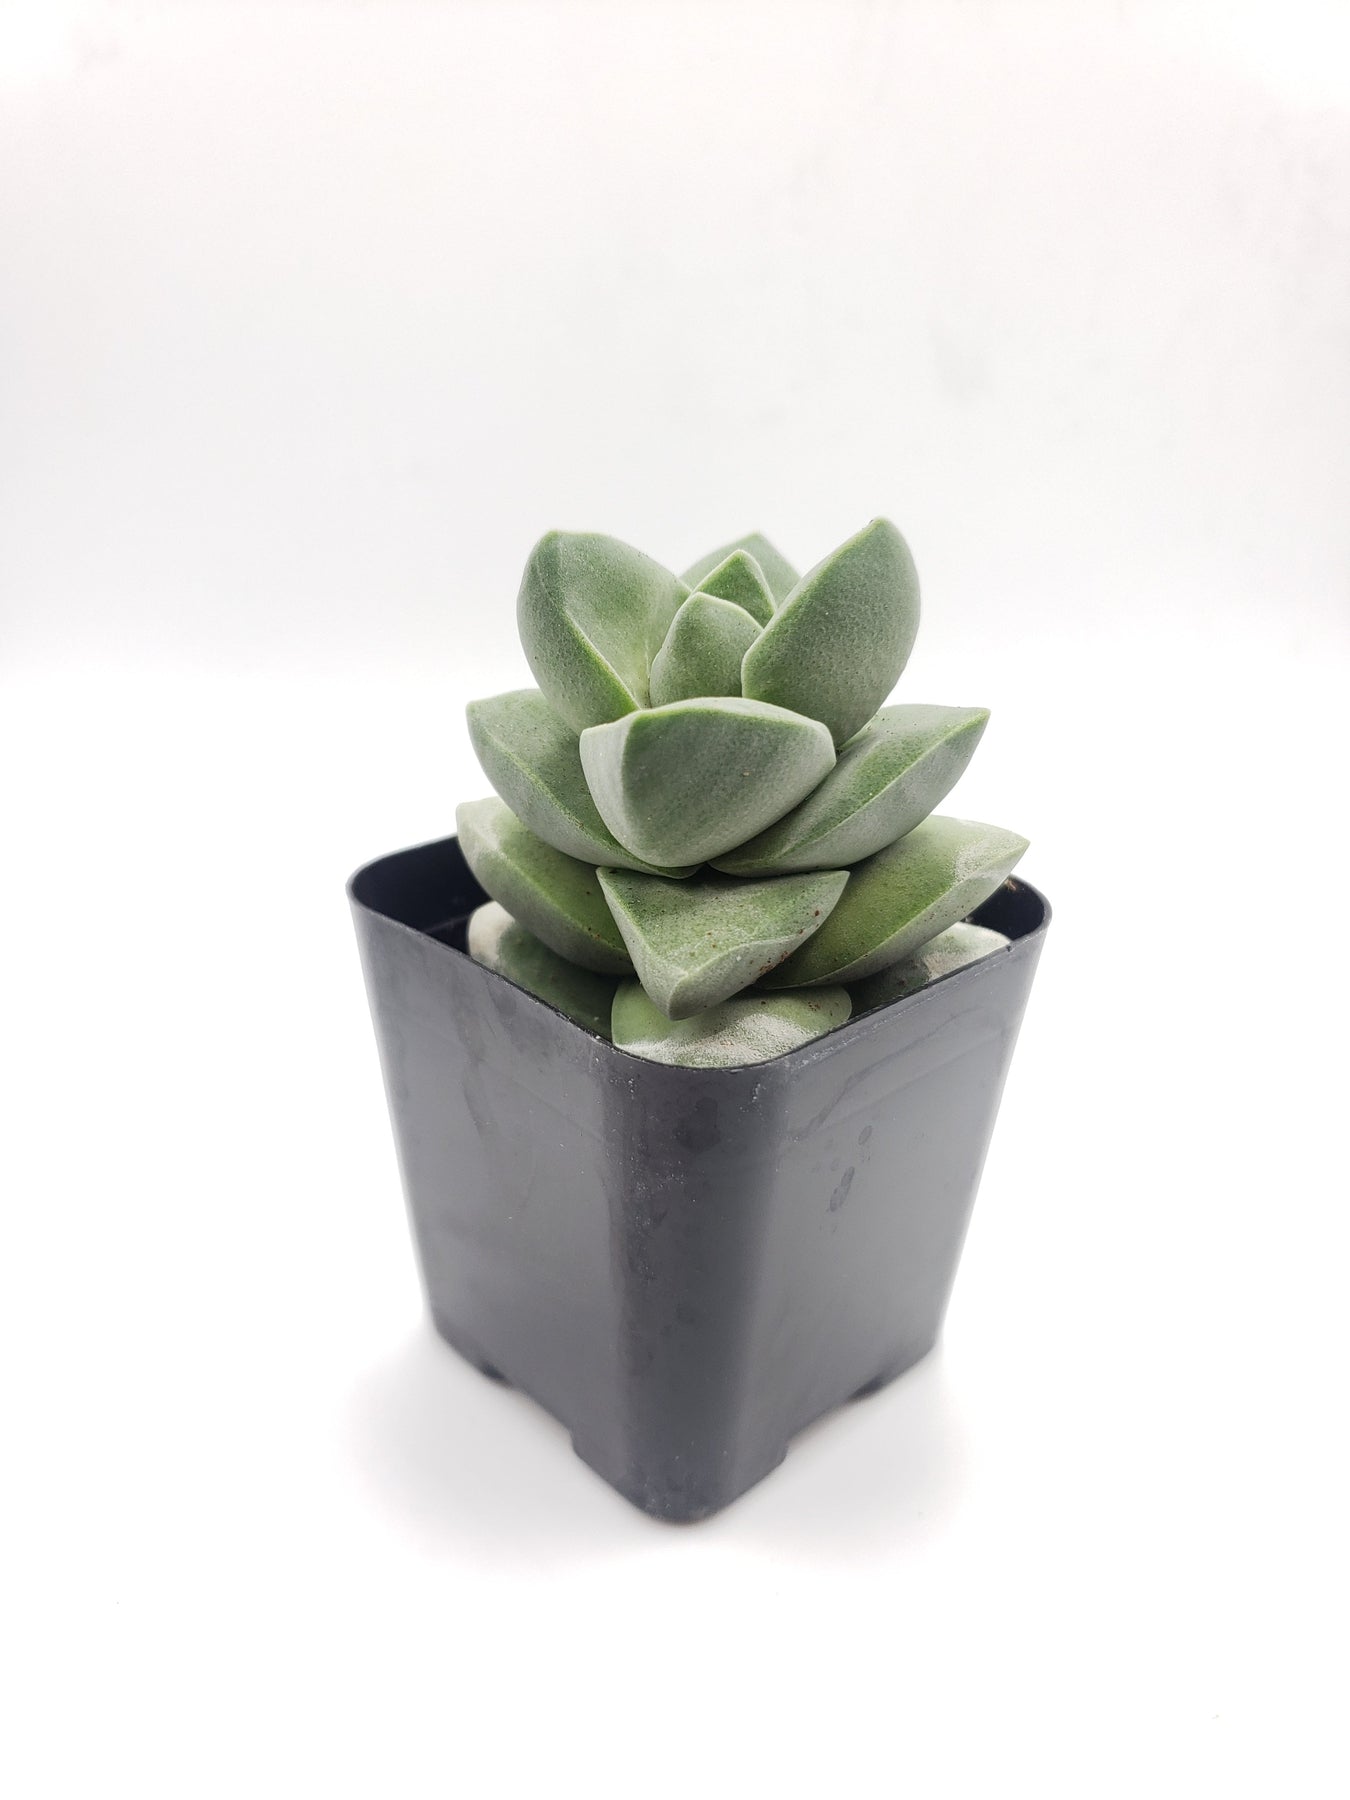 #28 Crassula chalky gray/white-Succulent - Small - Exact 2in Type-The Succulent Source